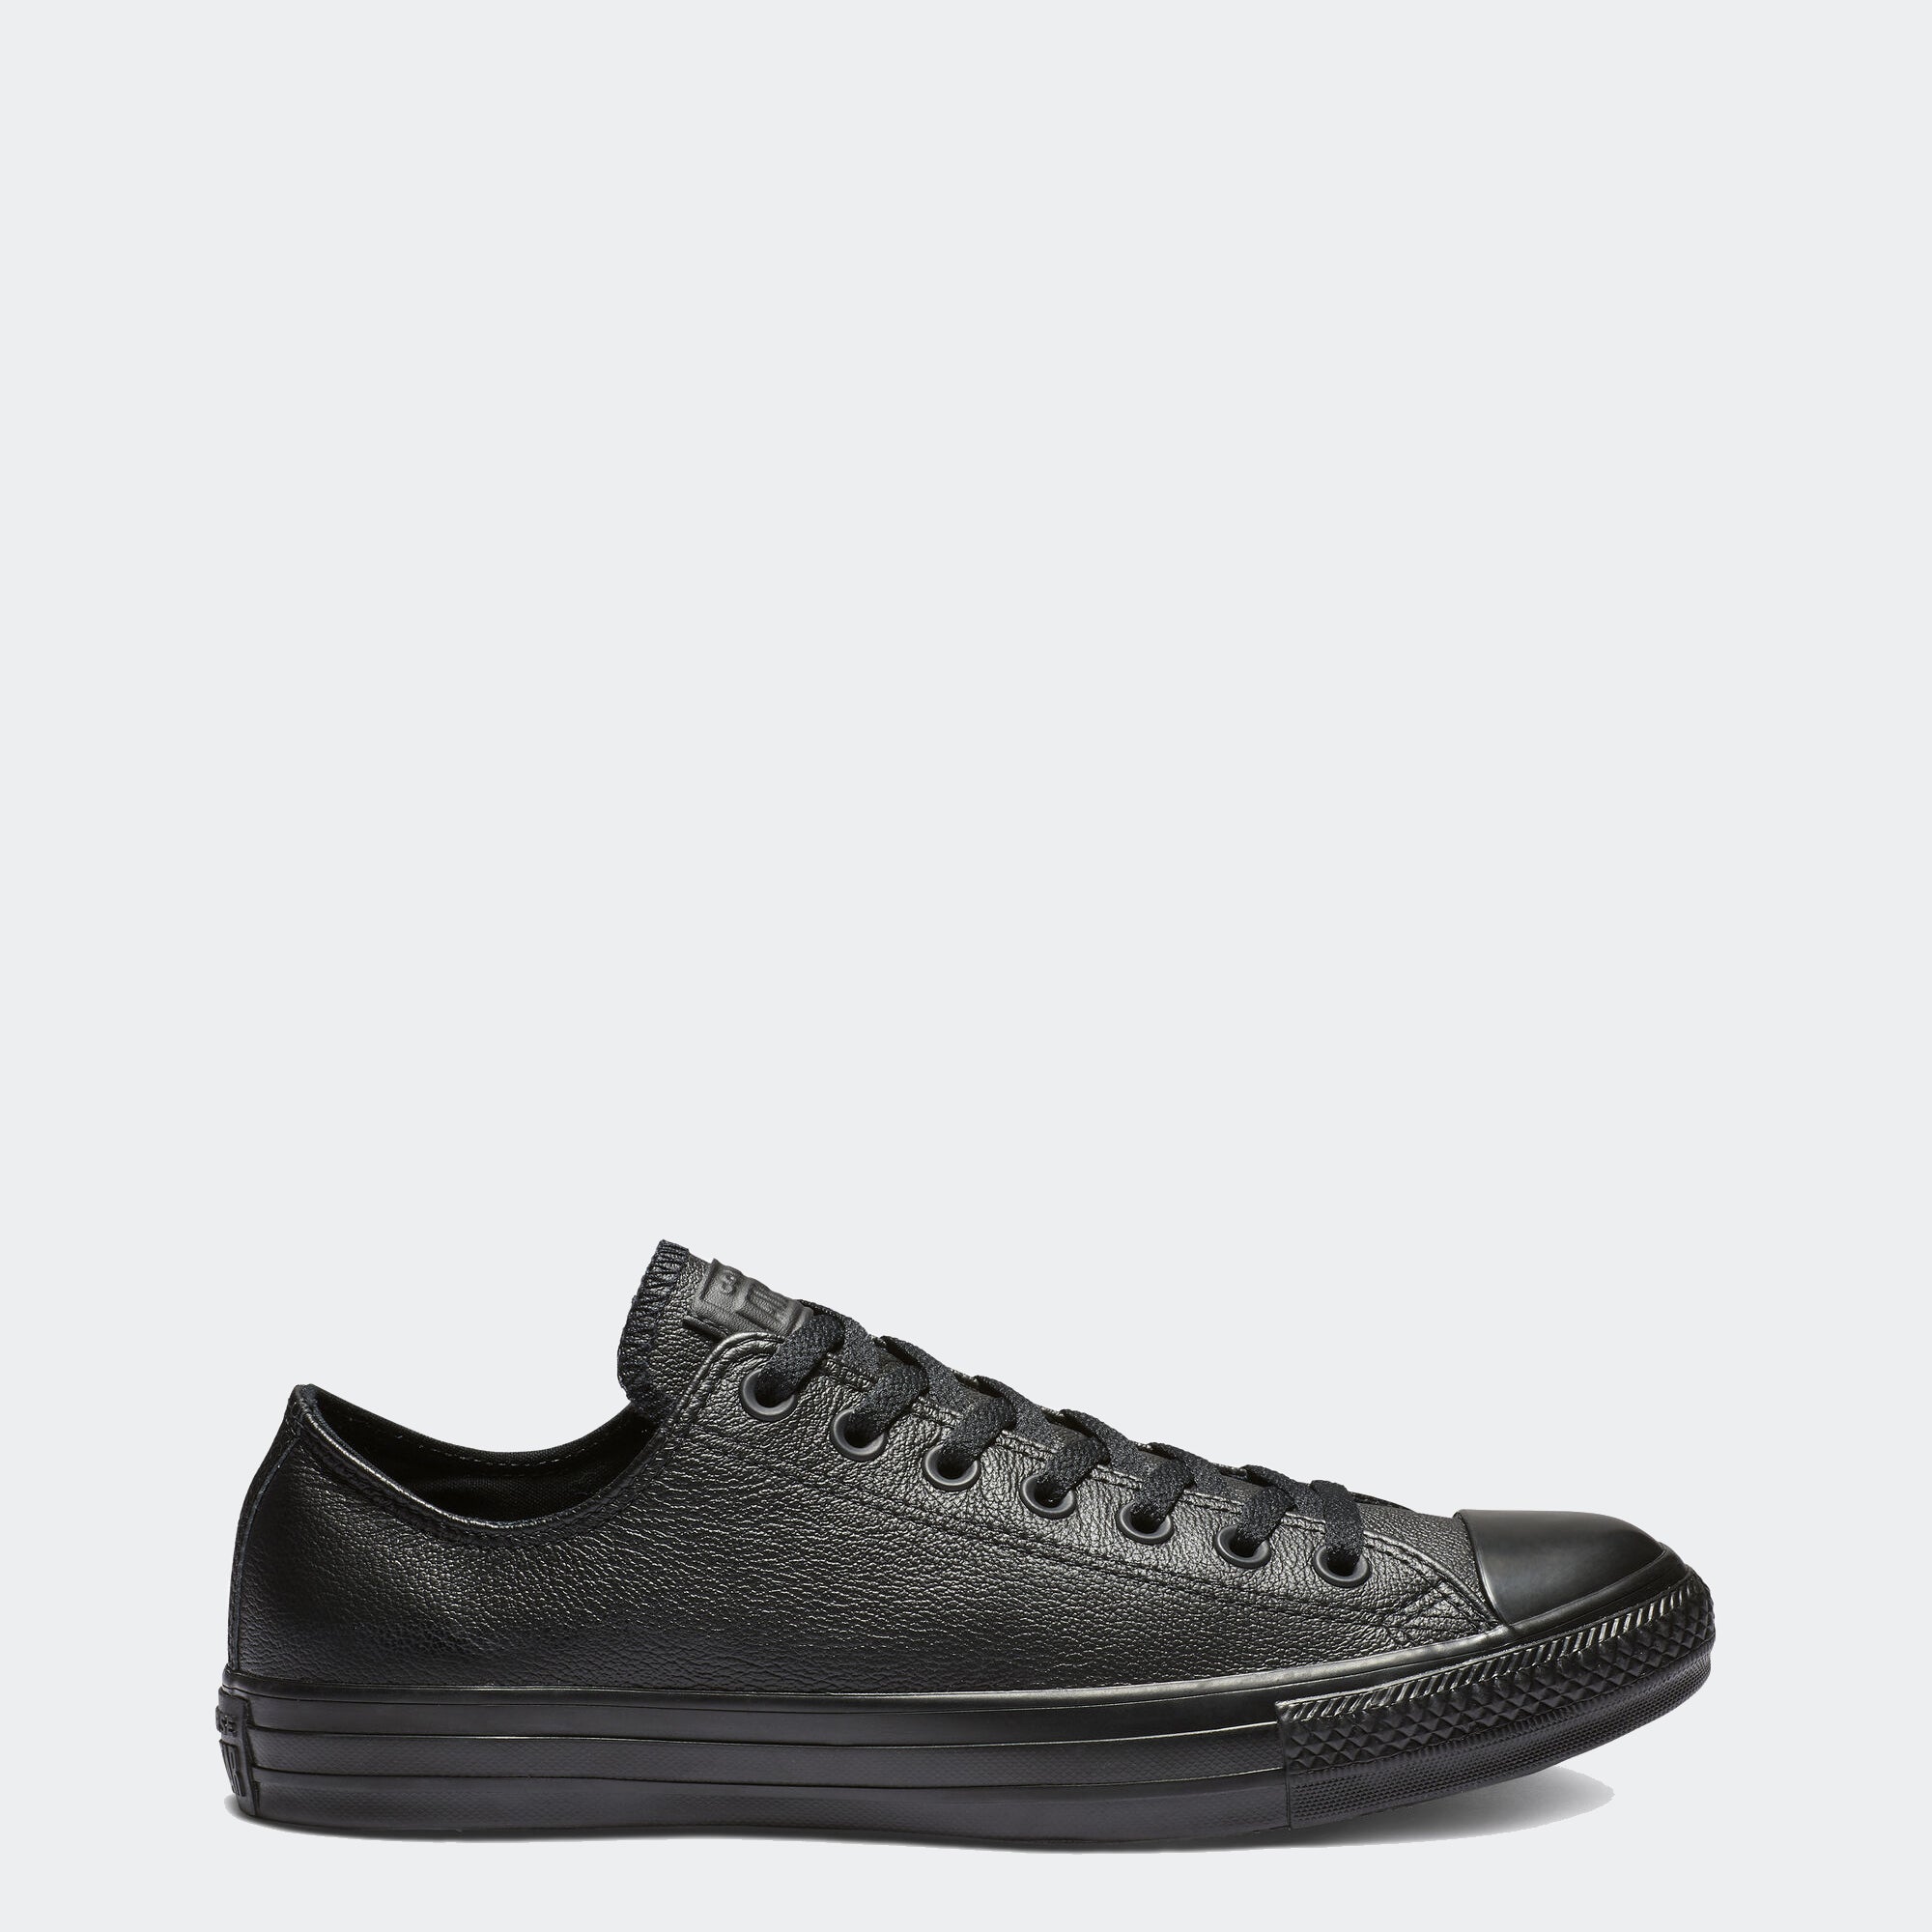 Converse Chuck Taylor All Star Leather Shoes | Chicago Sports